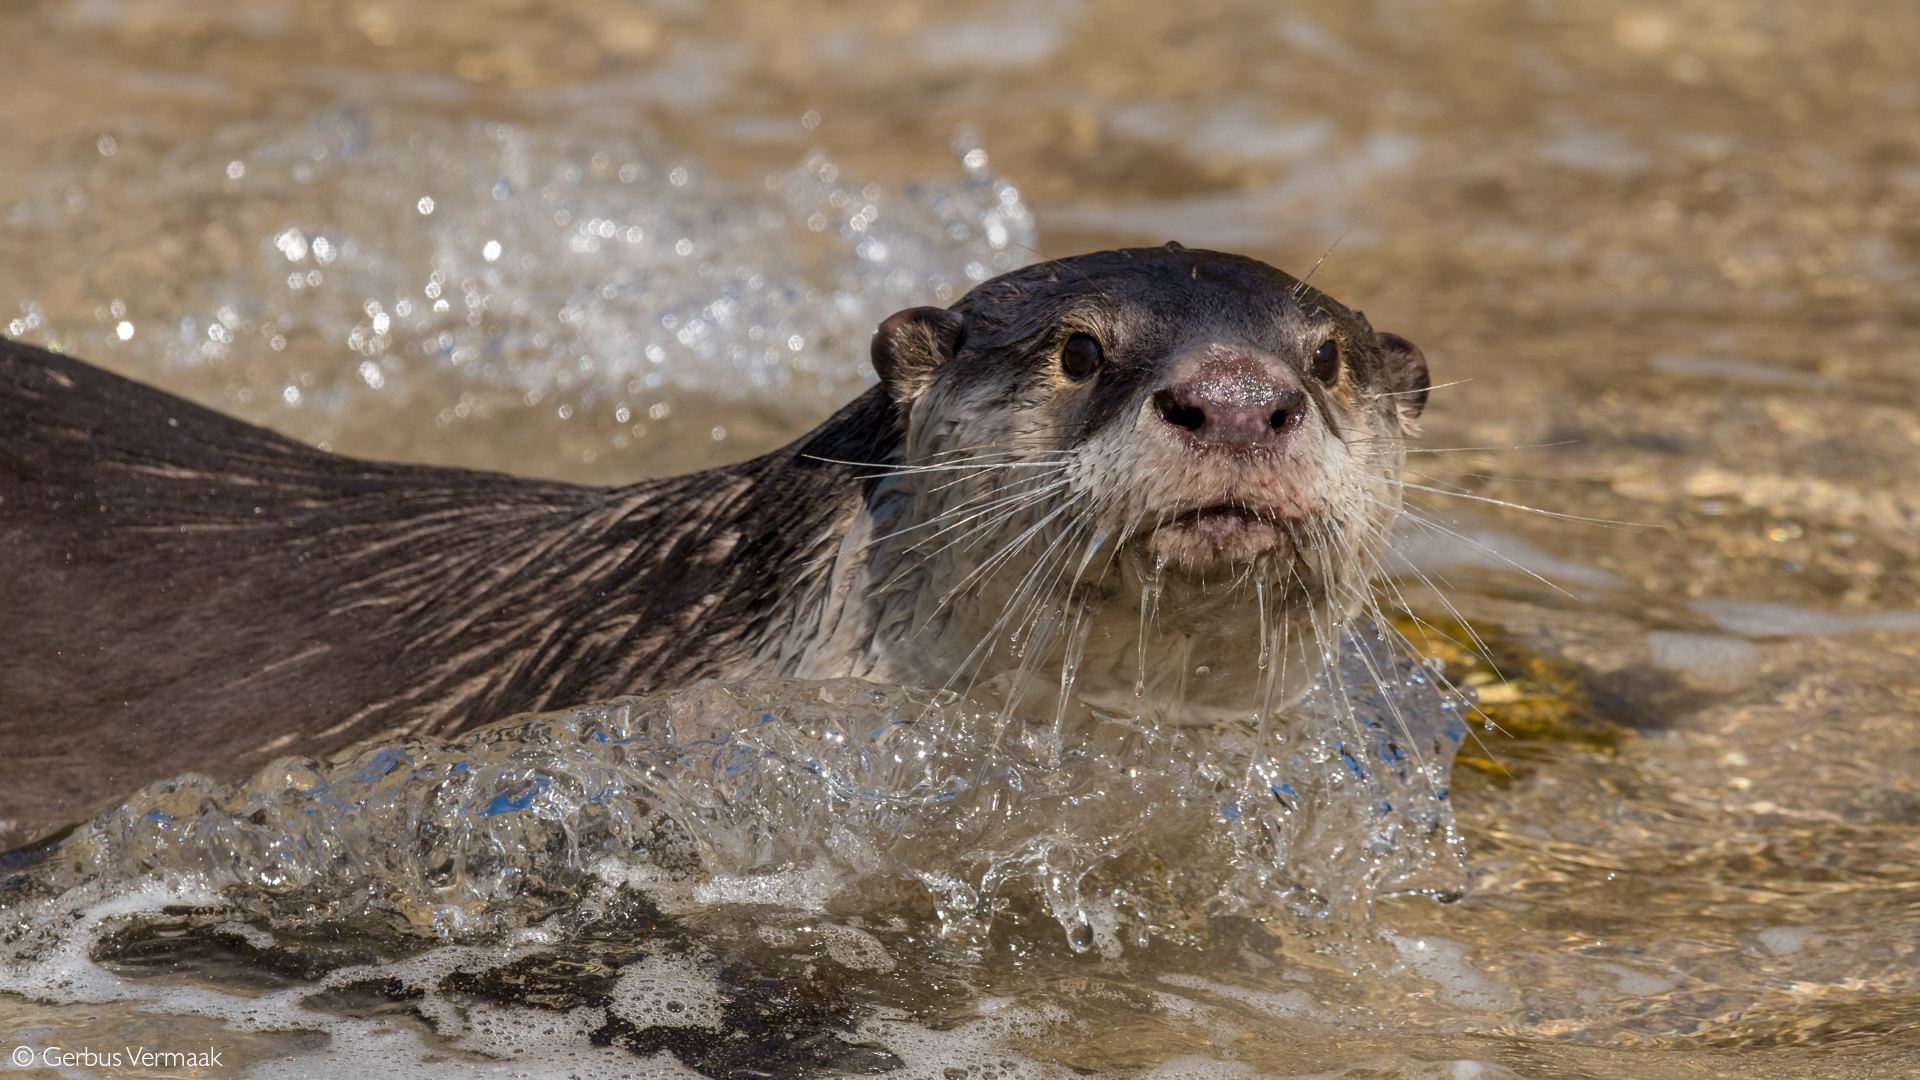 Otters of Africa